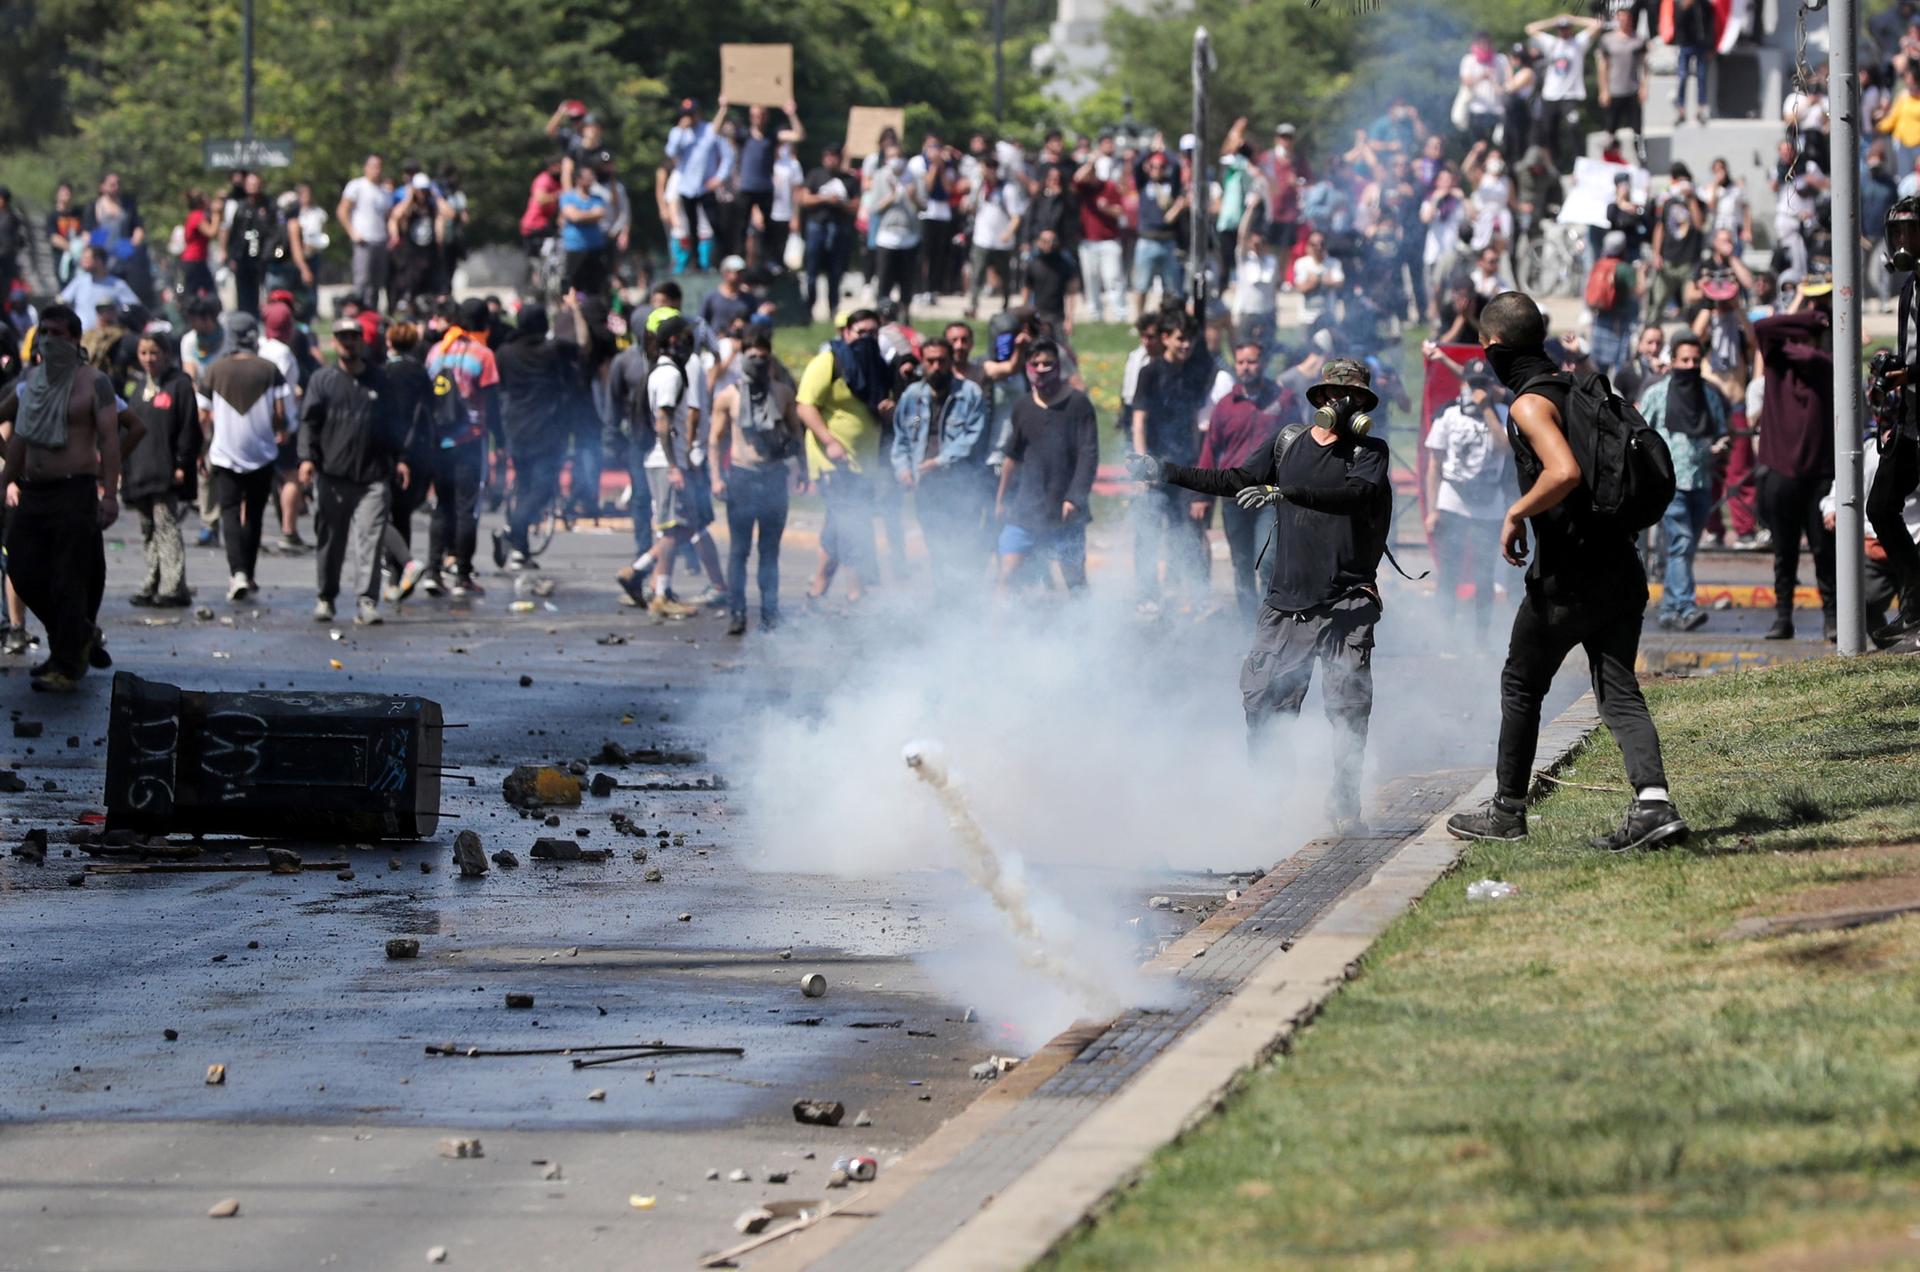 A large group of protesters are shown in the street with a smoking tear gas canister bouncing through the middle of the group.